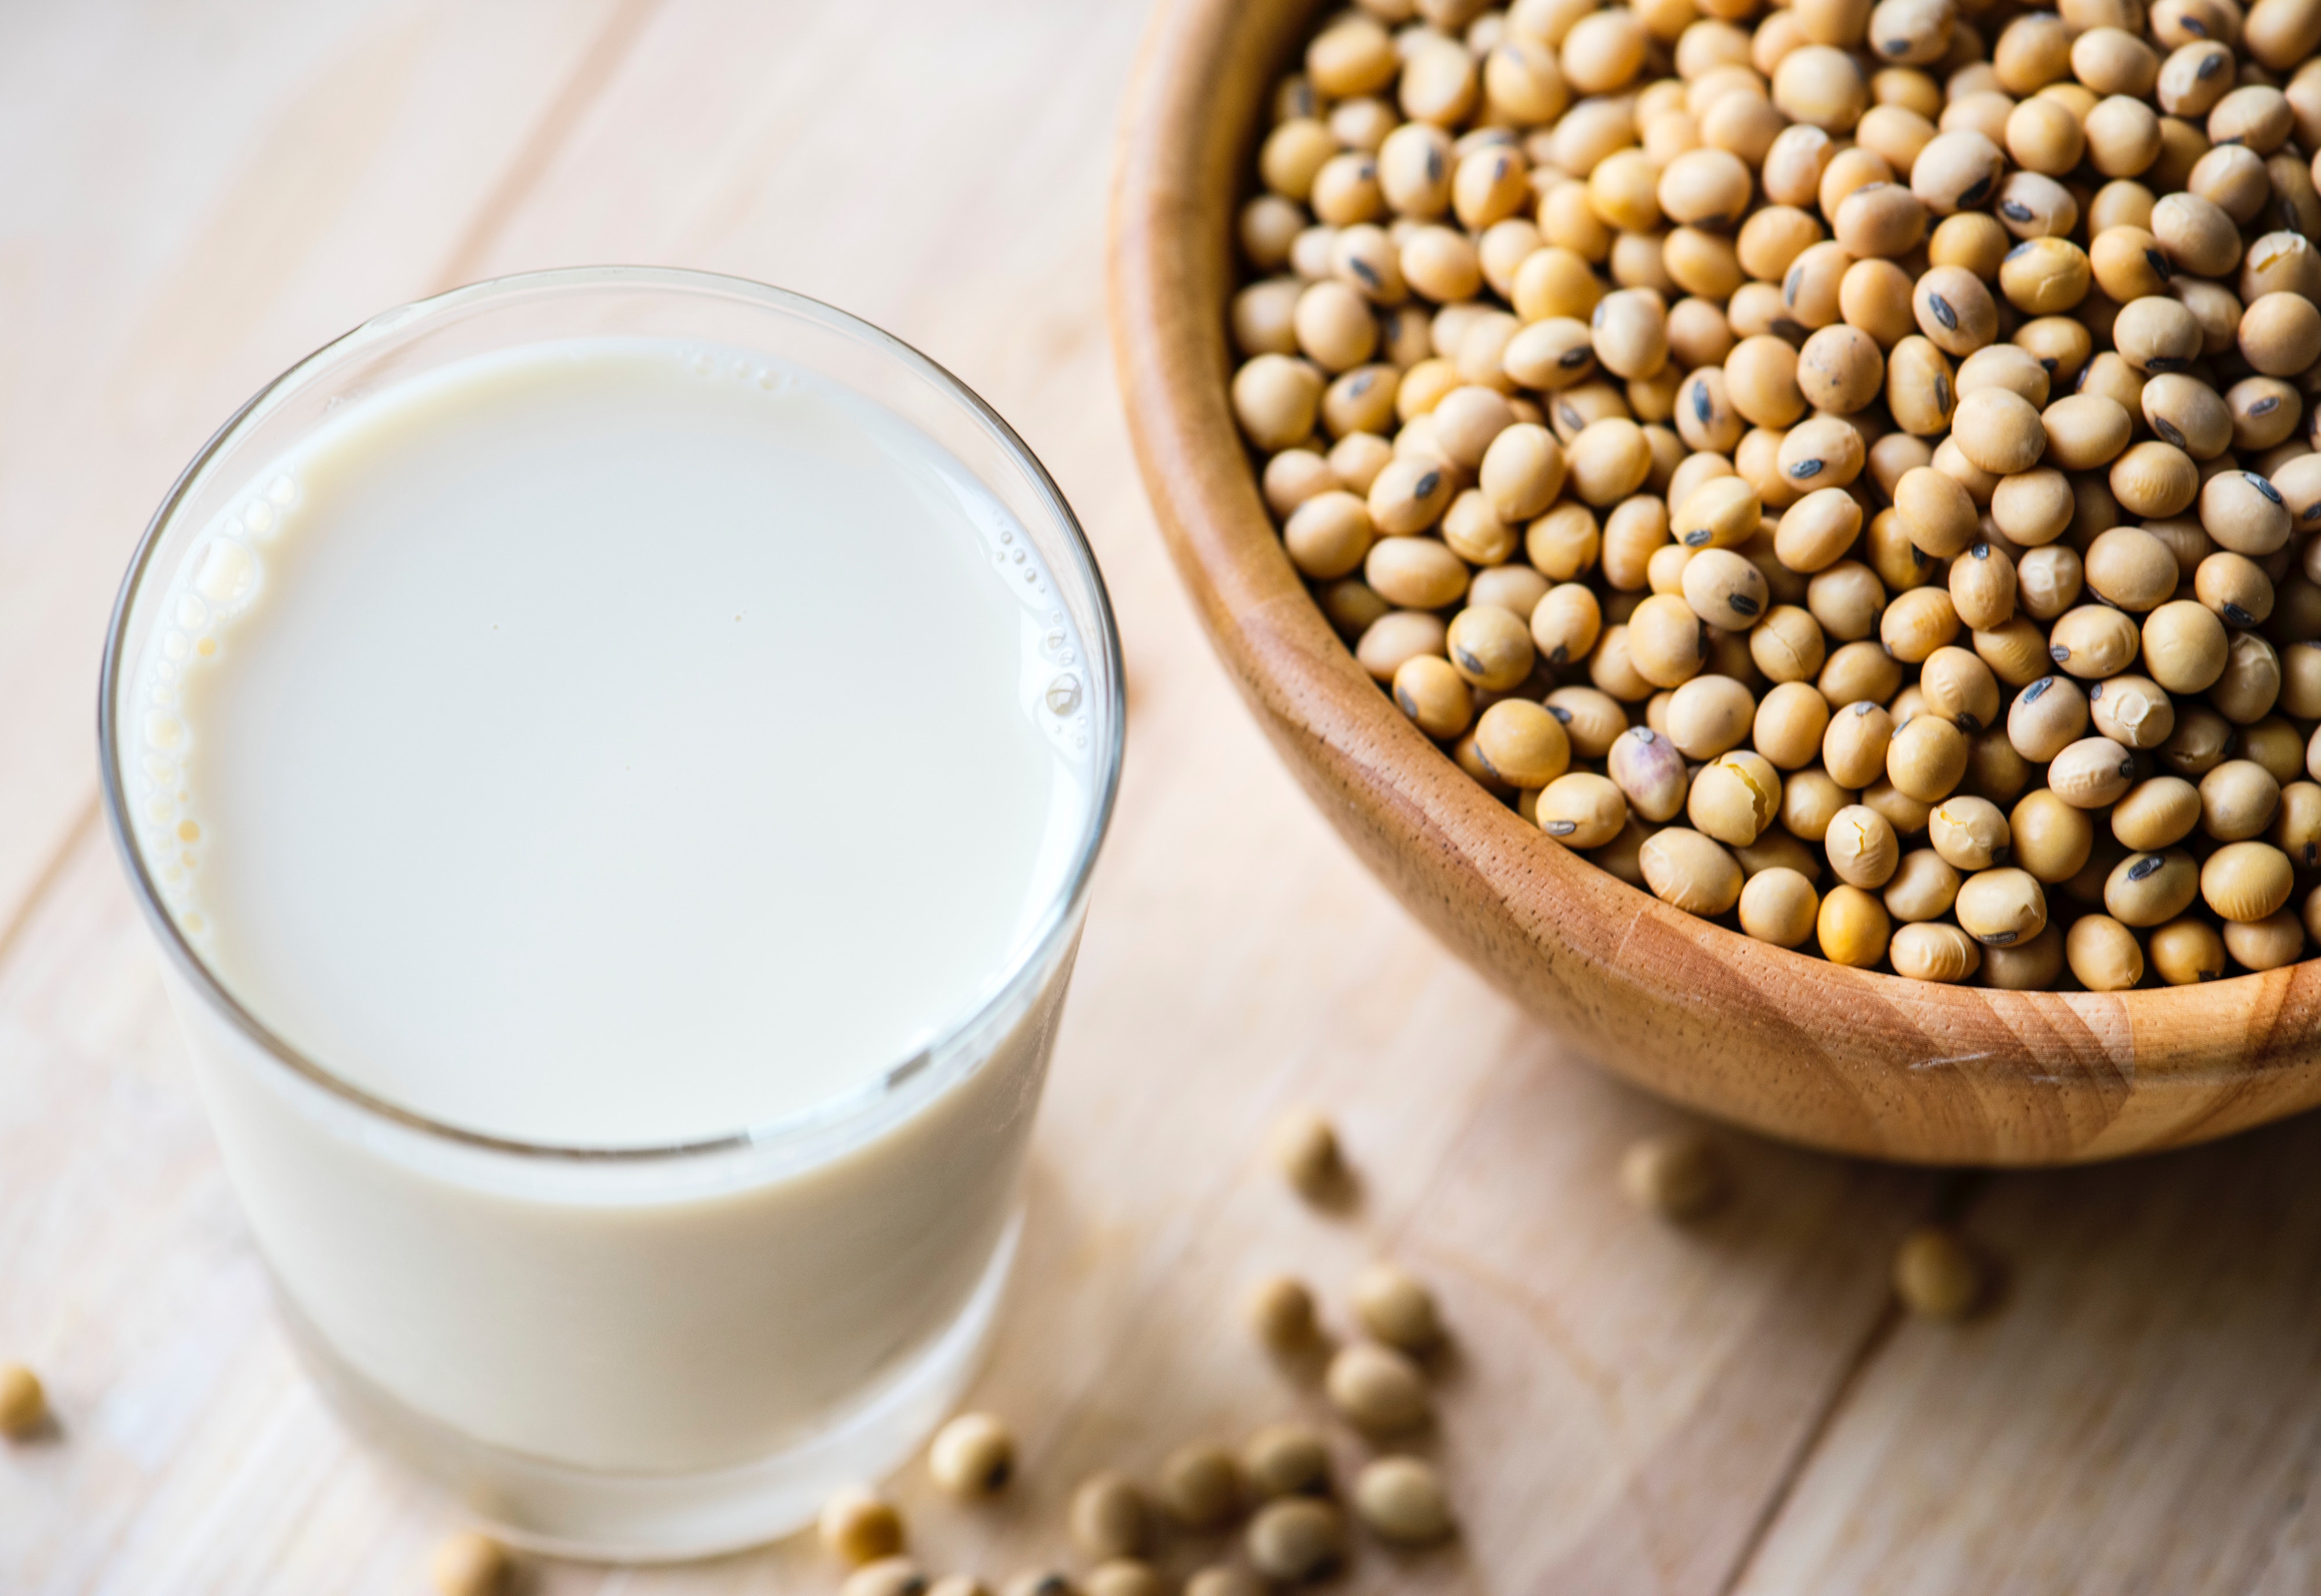 Applications of enzyme preparation in soybean protein processing